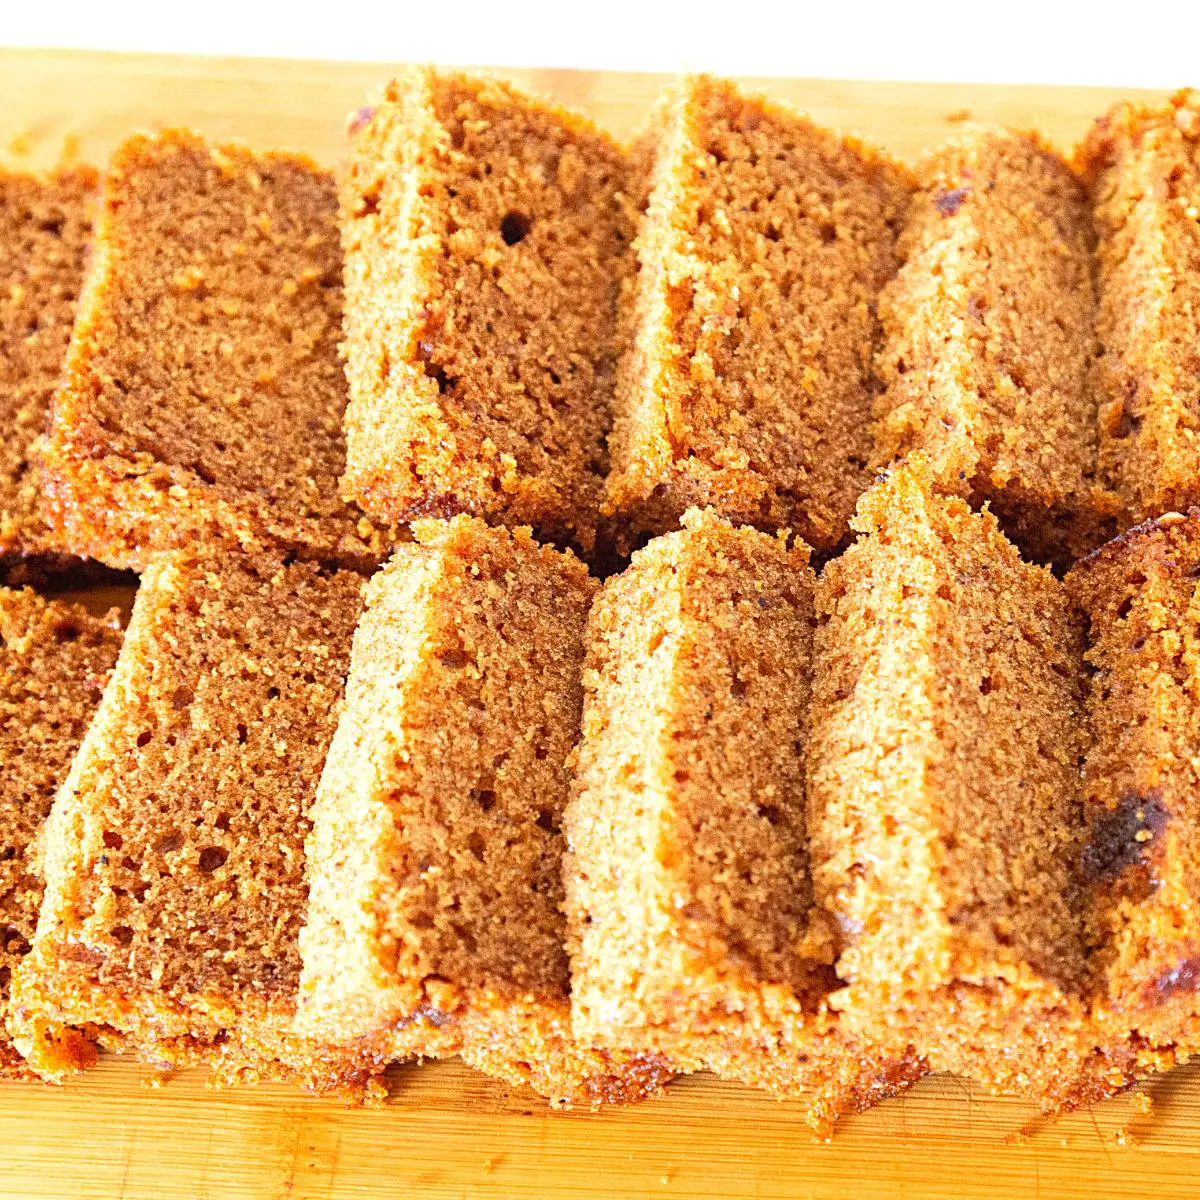 slices of brown cashew cake.